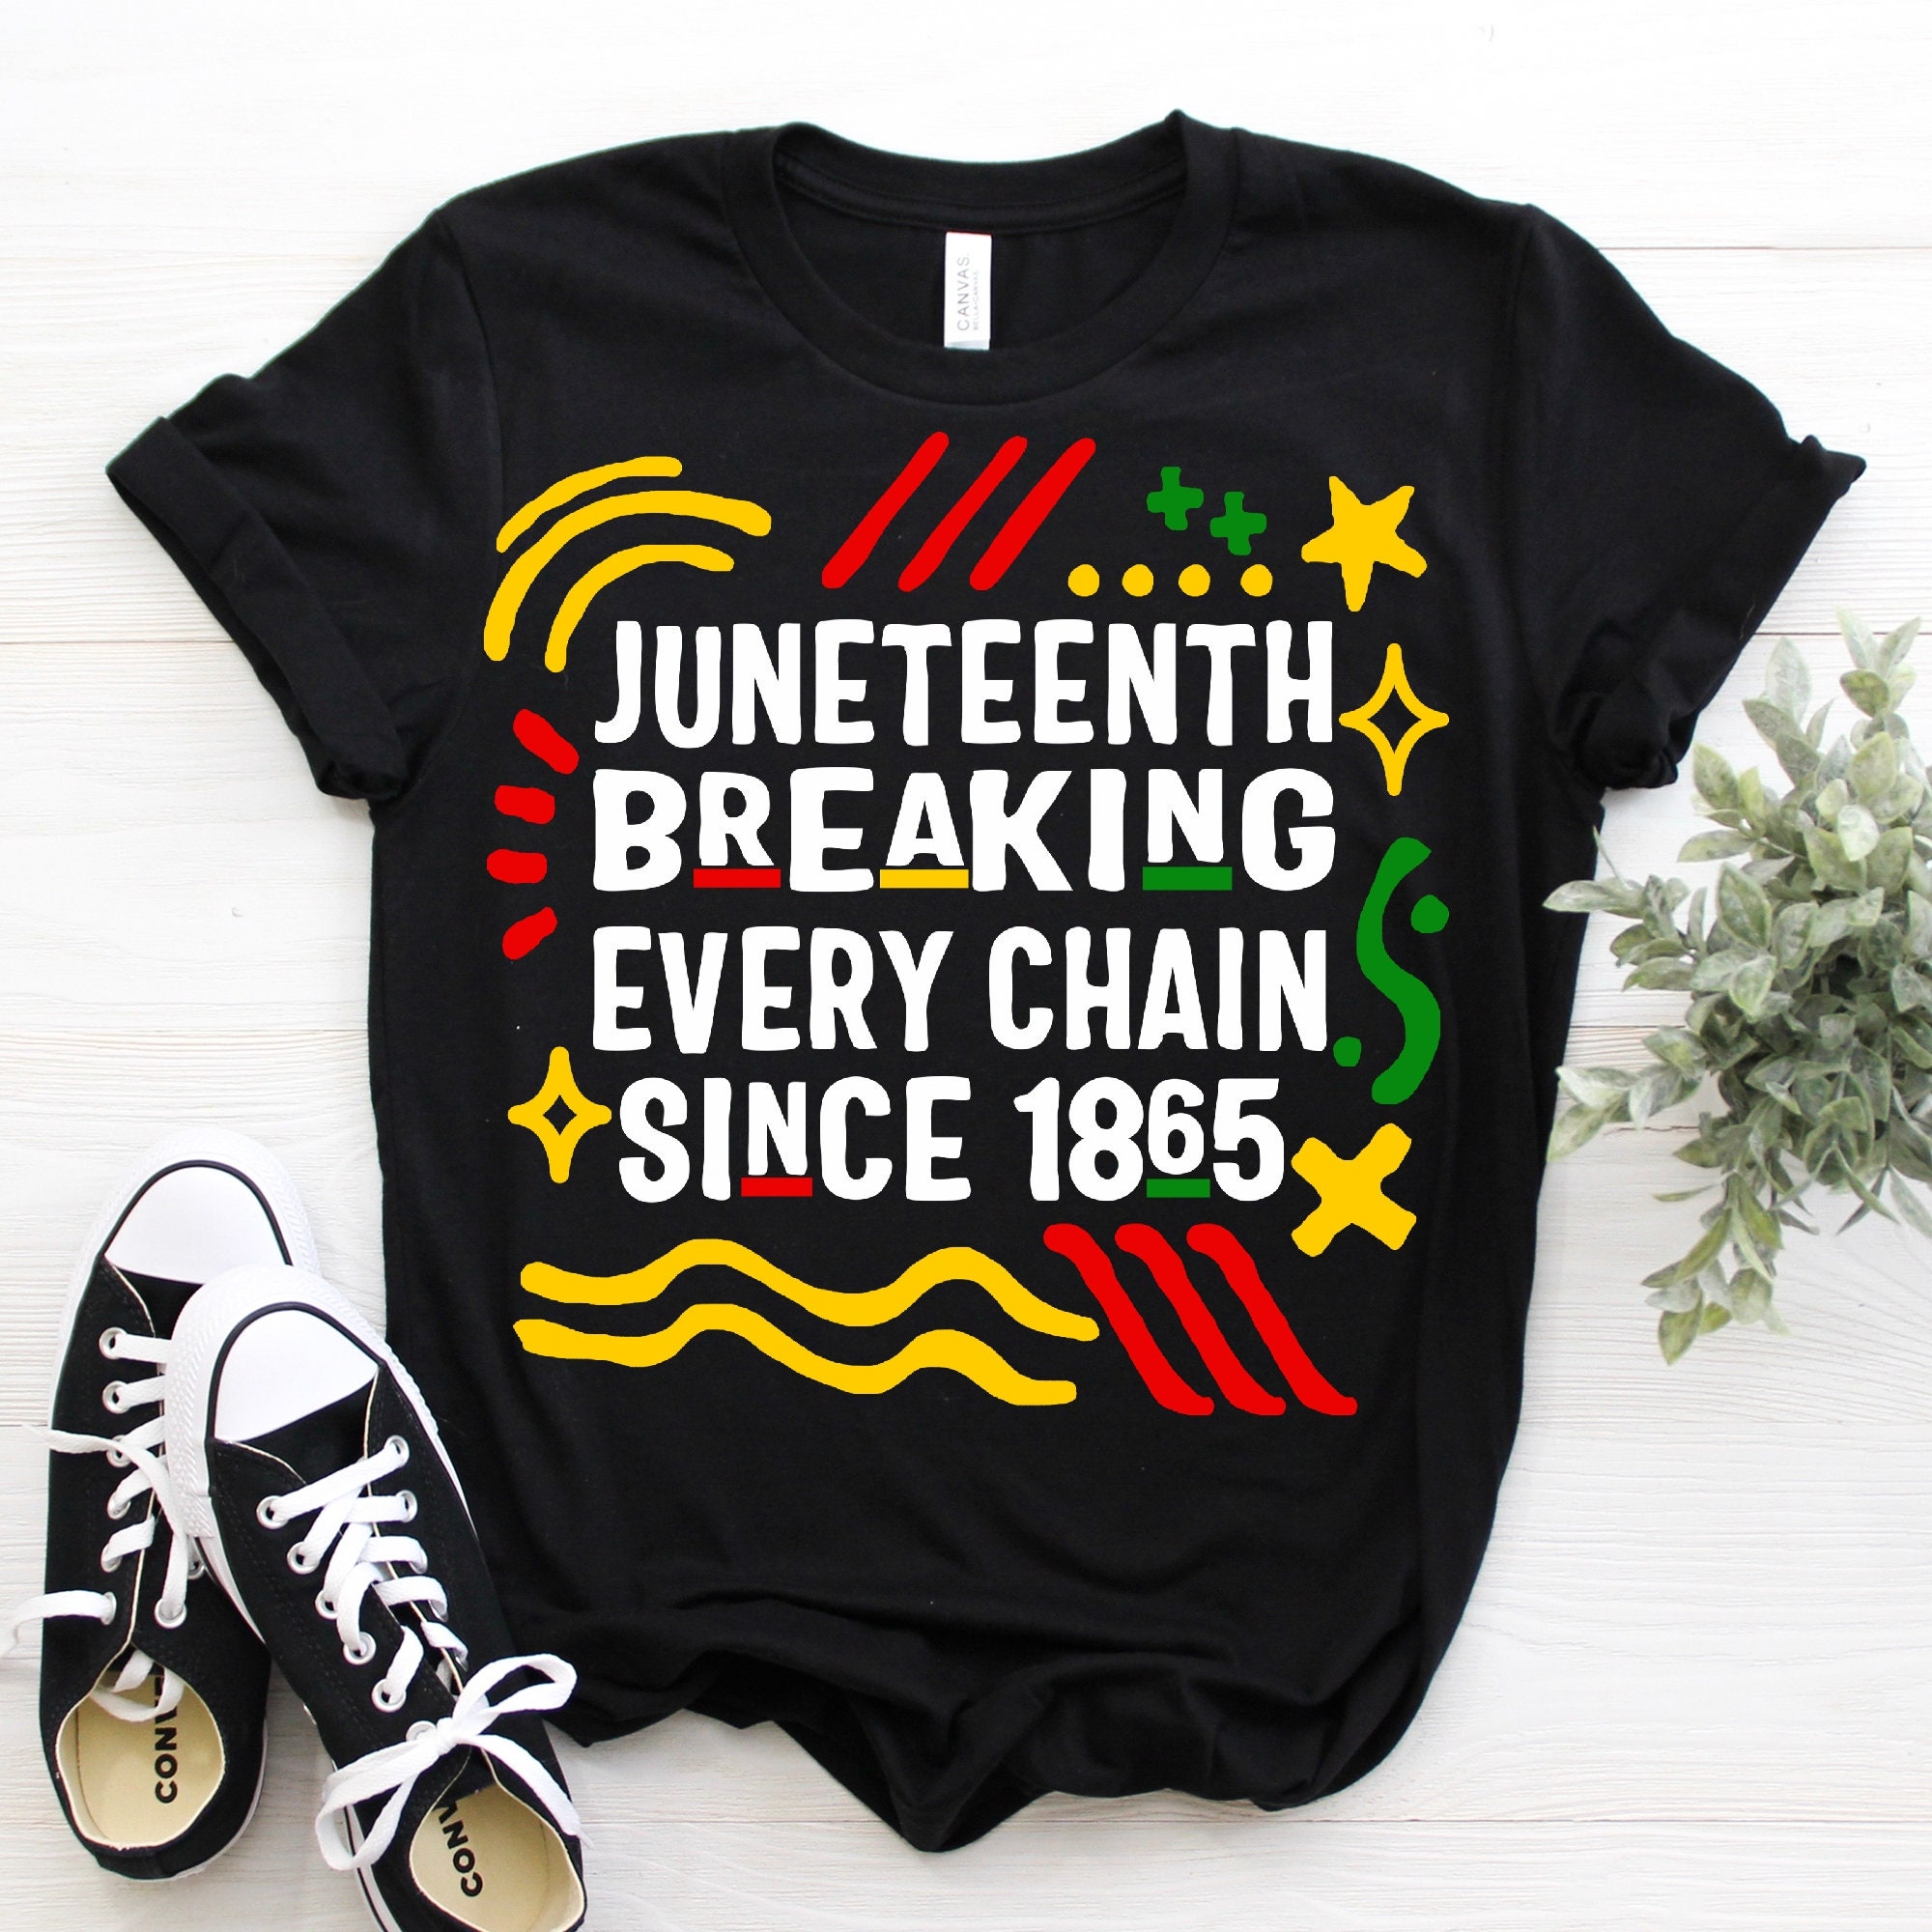 Juneteenth Breaking Every Chain Since 1865, African American Melanin Celebration Of June 19th 1865 T Shirt